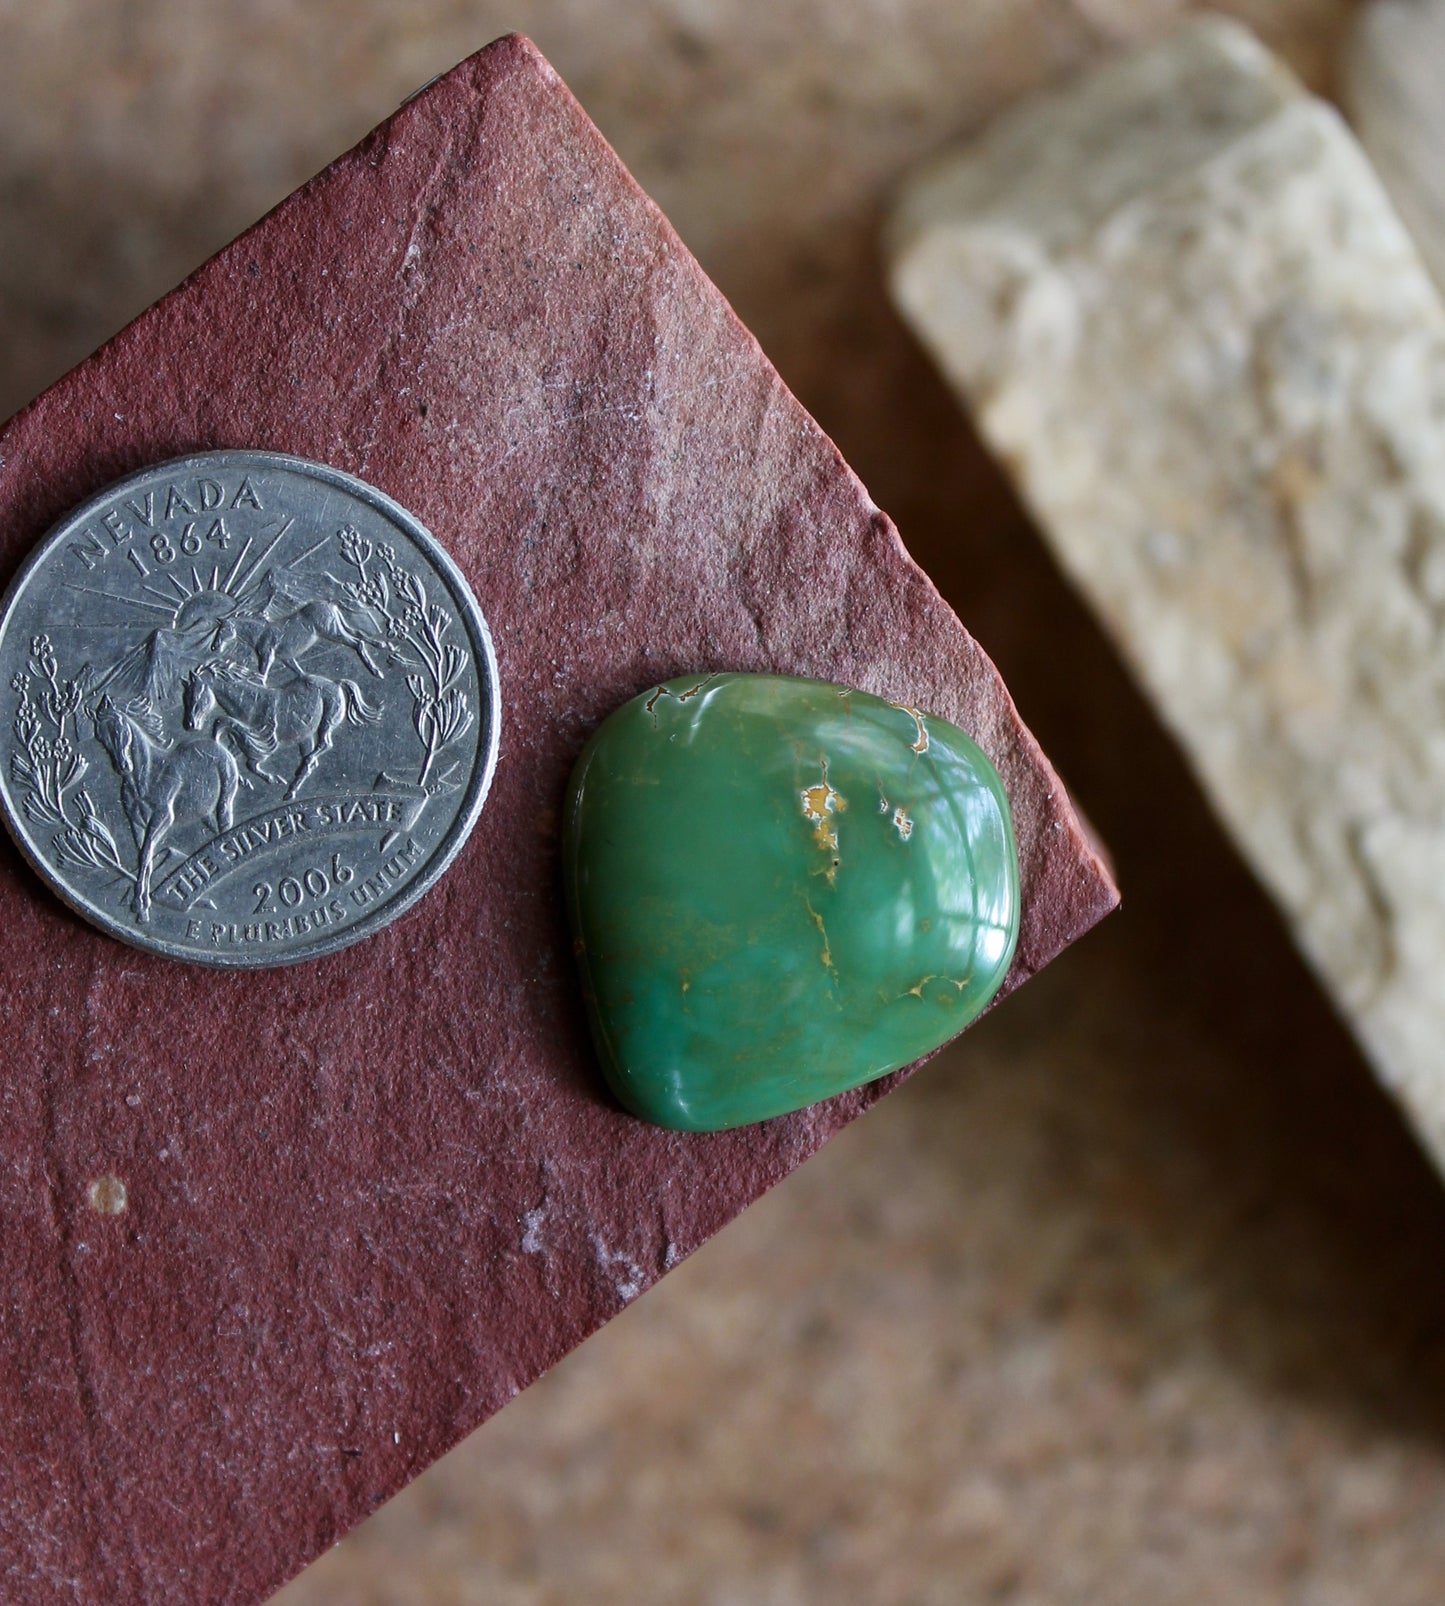 15 green turquoise cabochon from Stone Mountain Mine